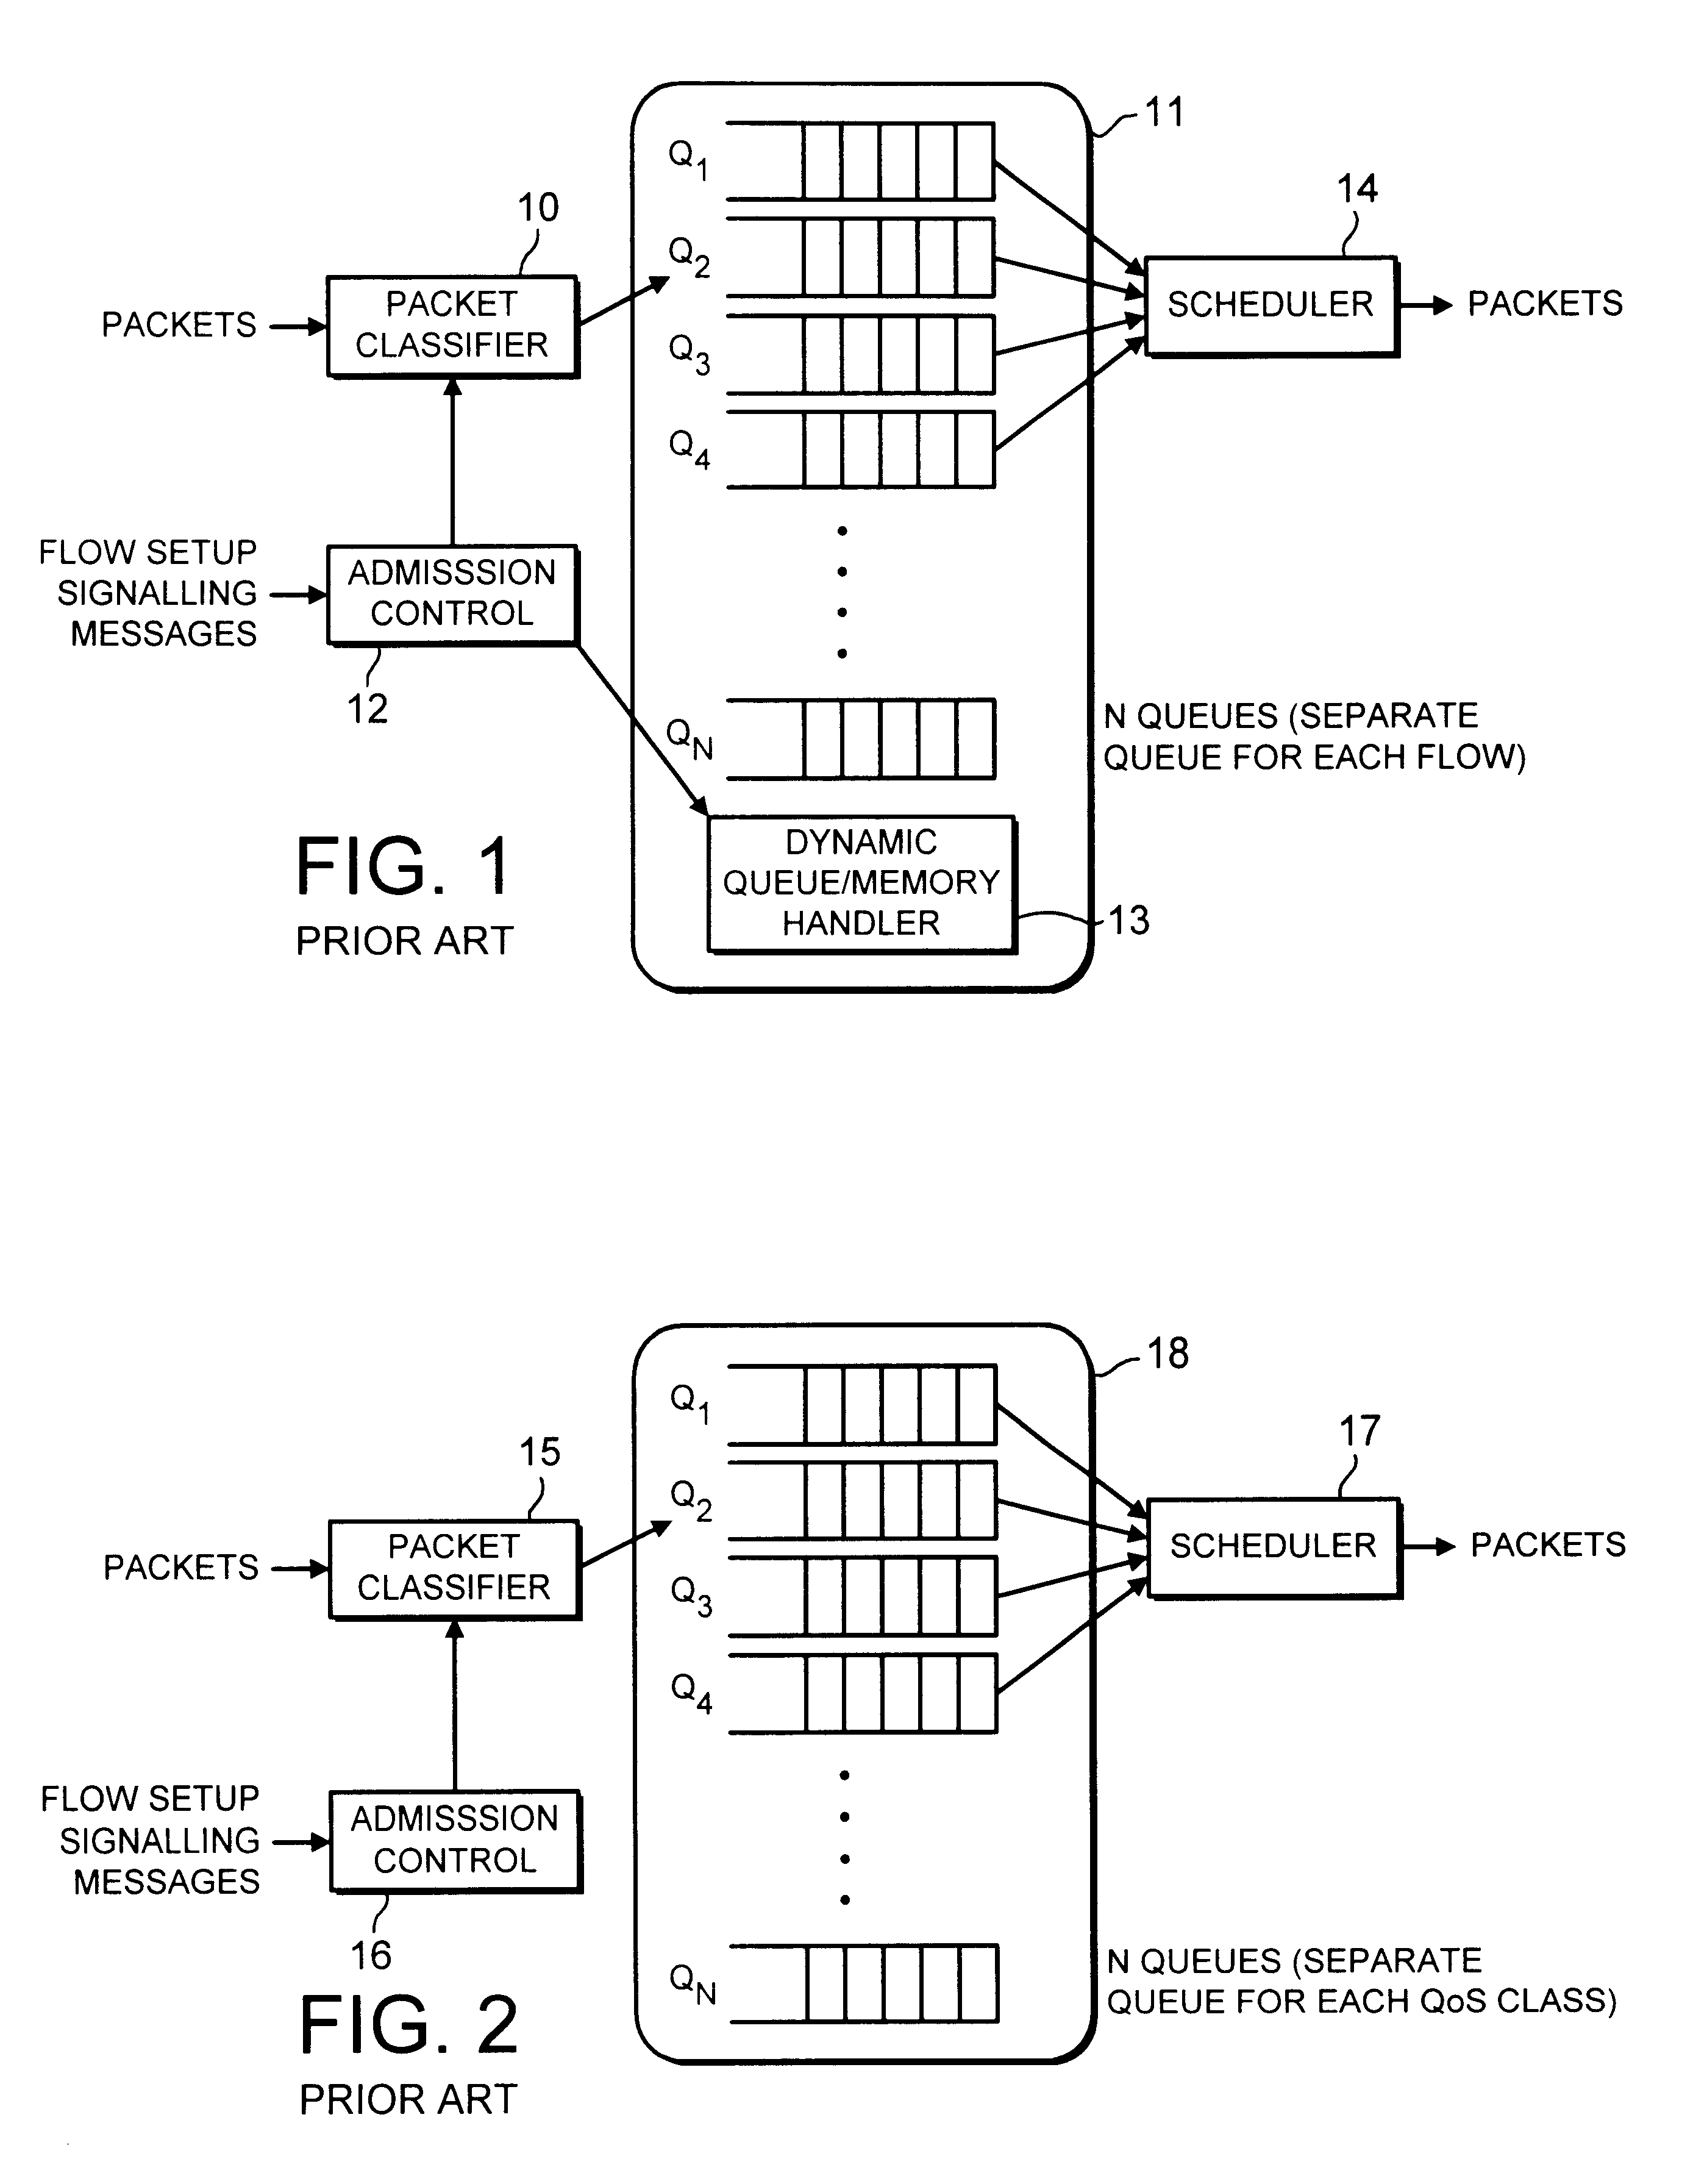 Architecture for integrated services packet-switched networks